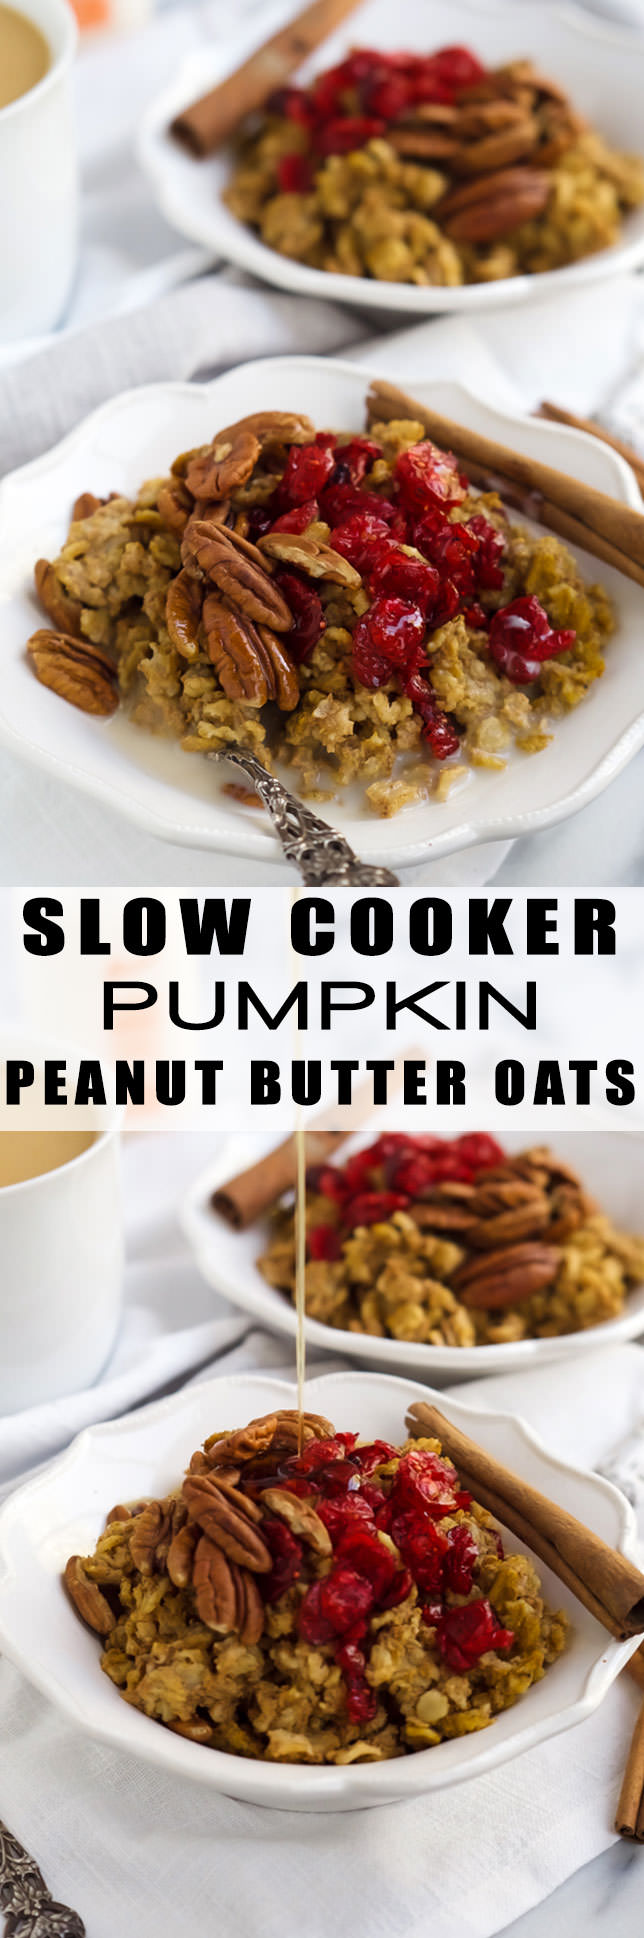 Slow Cooker Pumpkin Peanut Butter Oatmeal is super simple and loaded with pumpkin, peanut butter, oats, cinnamon and touch of brown sugar for the perfect fall breakfast!